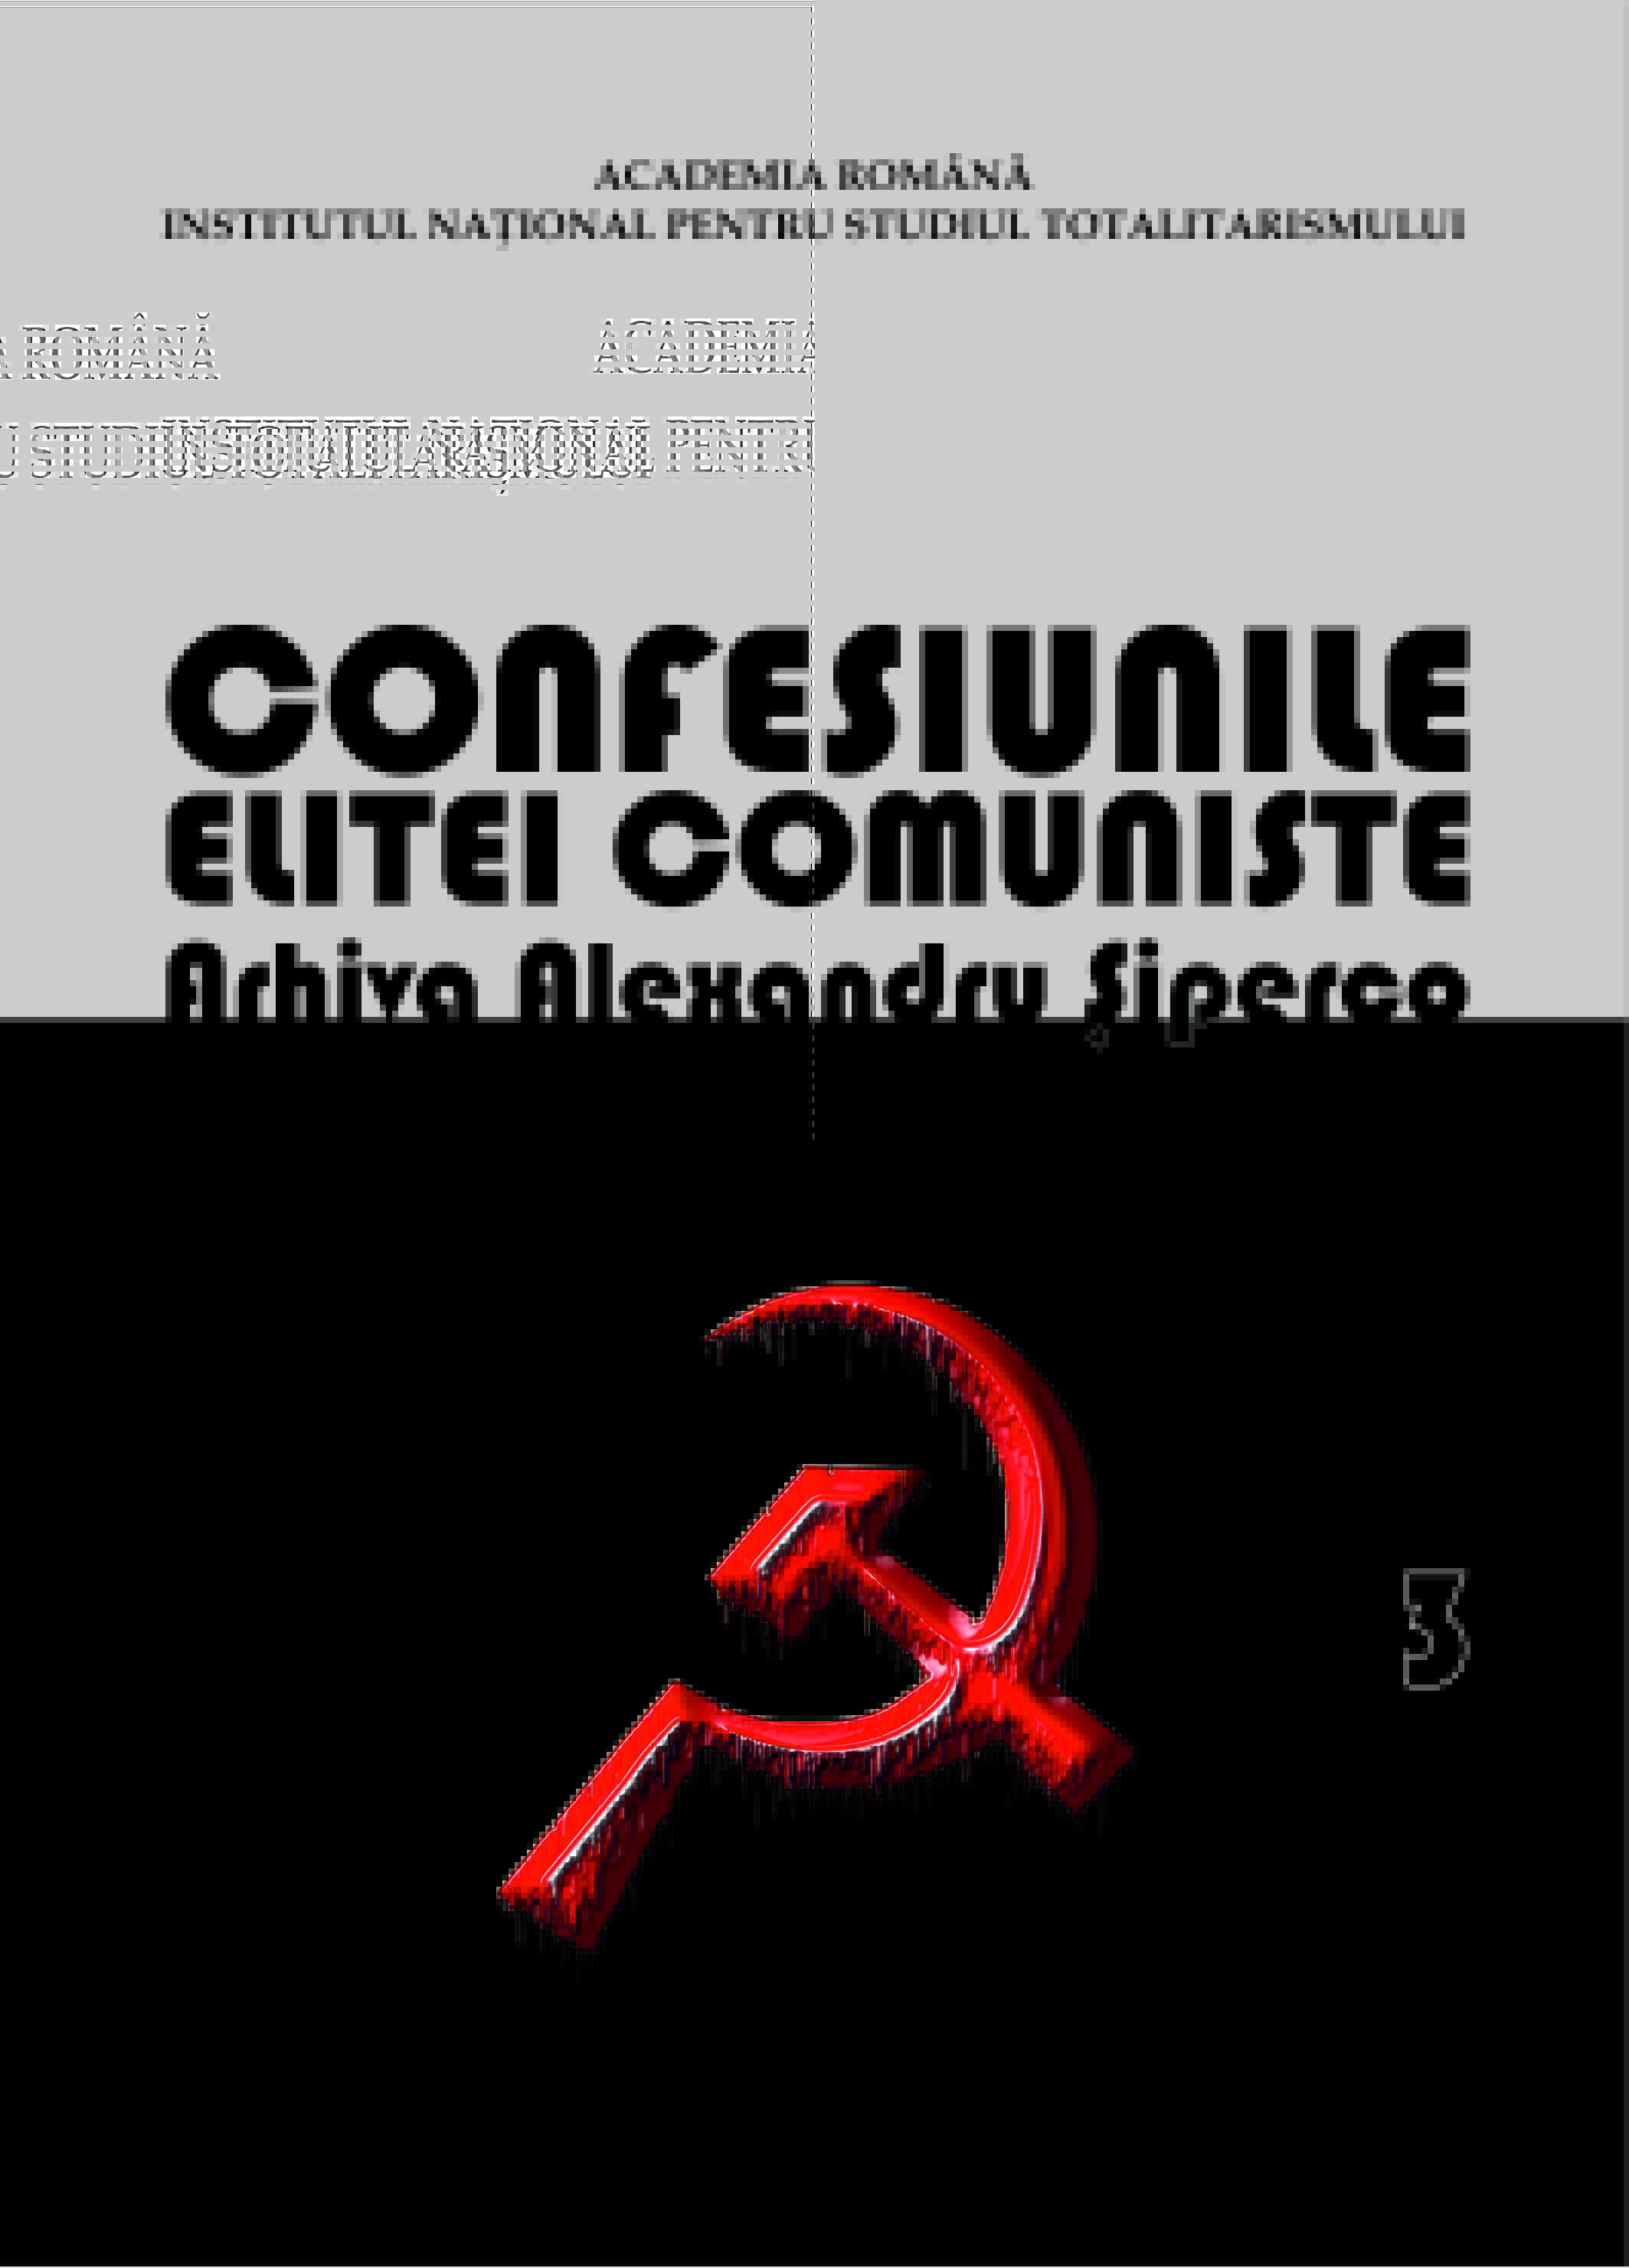 Confessions of the Communist elite. Romania 1944-1965: rivalries, repressions, murders… Alexander Siperco Archive, Volume III Cover Image